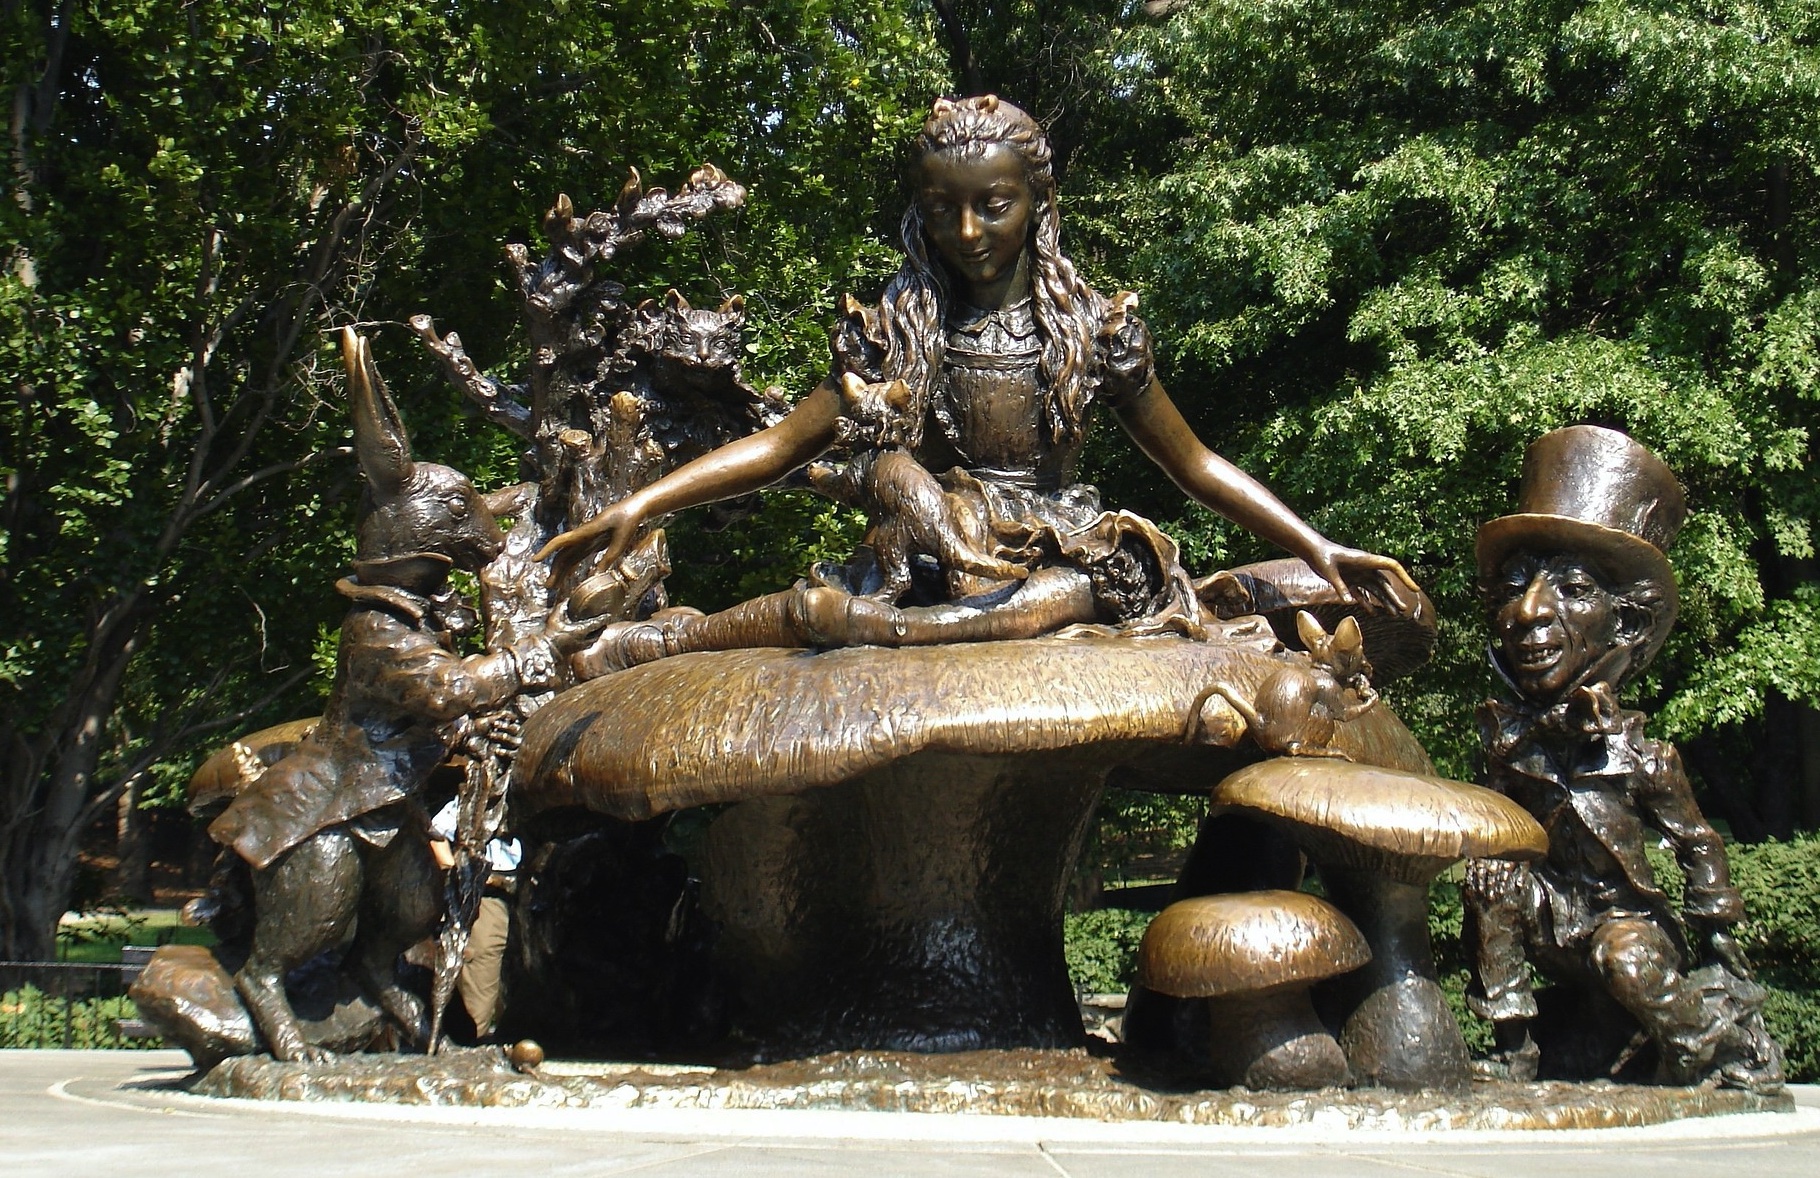 Statue of Alice in Wonderland in NYC-unlimited possibilities